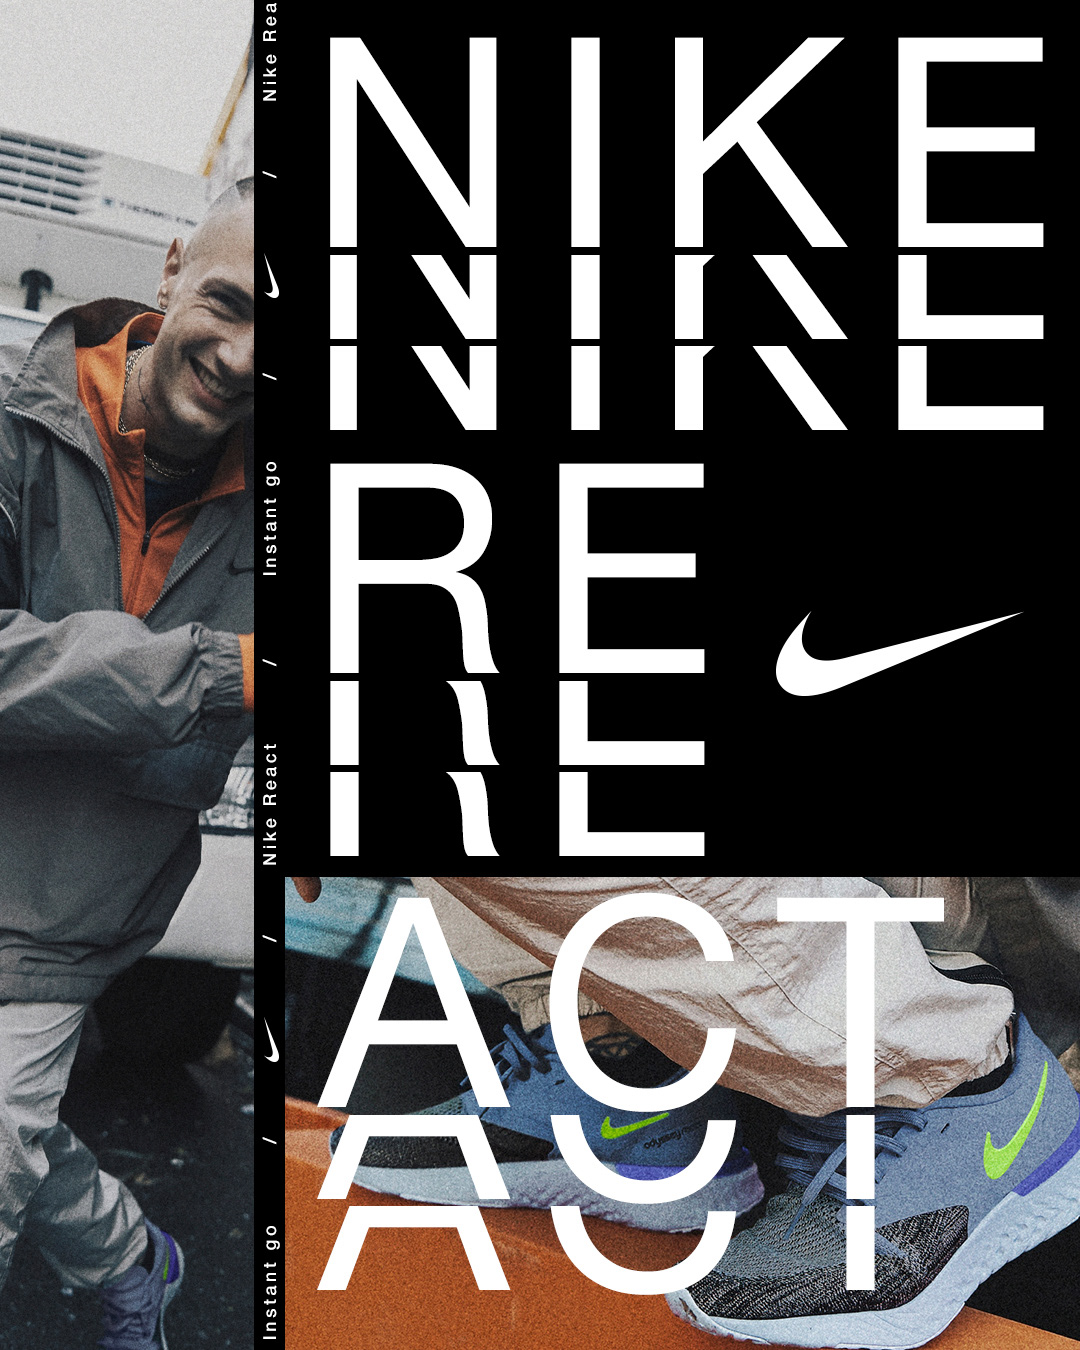 instagram Nike typography   social media Photography  Brutalism react shoes pattern neon